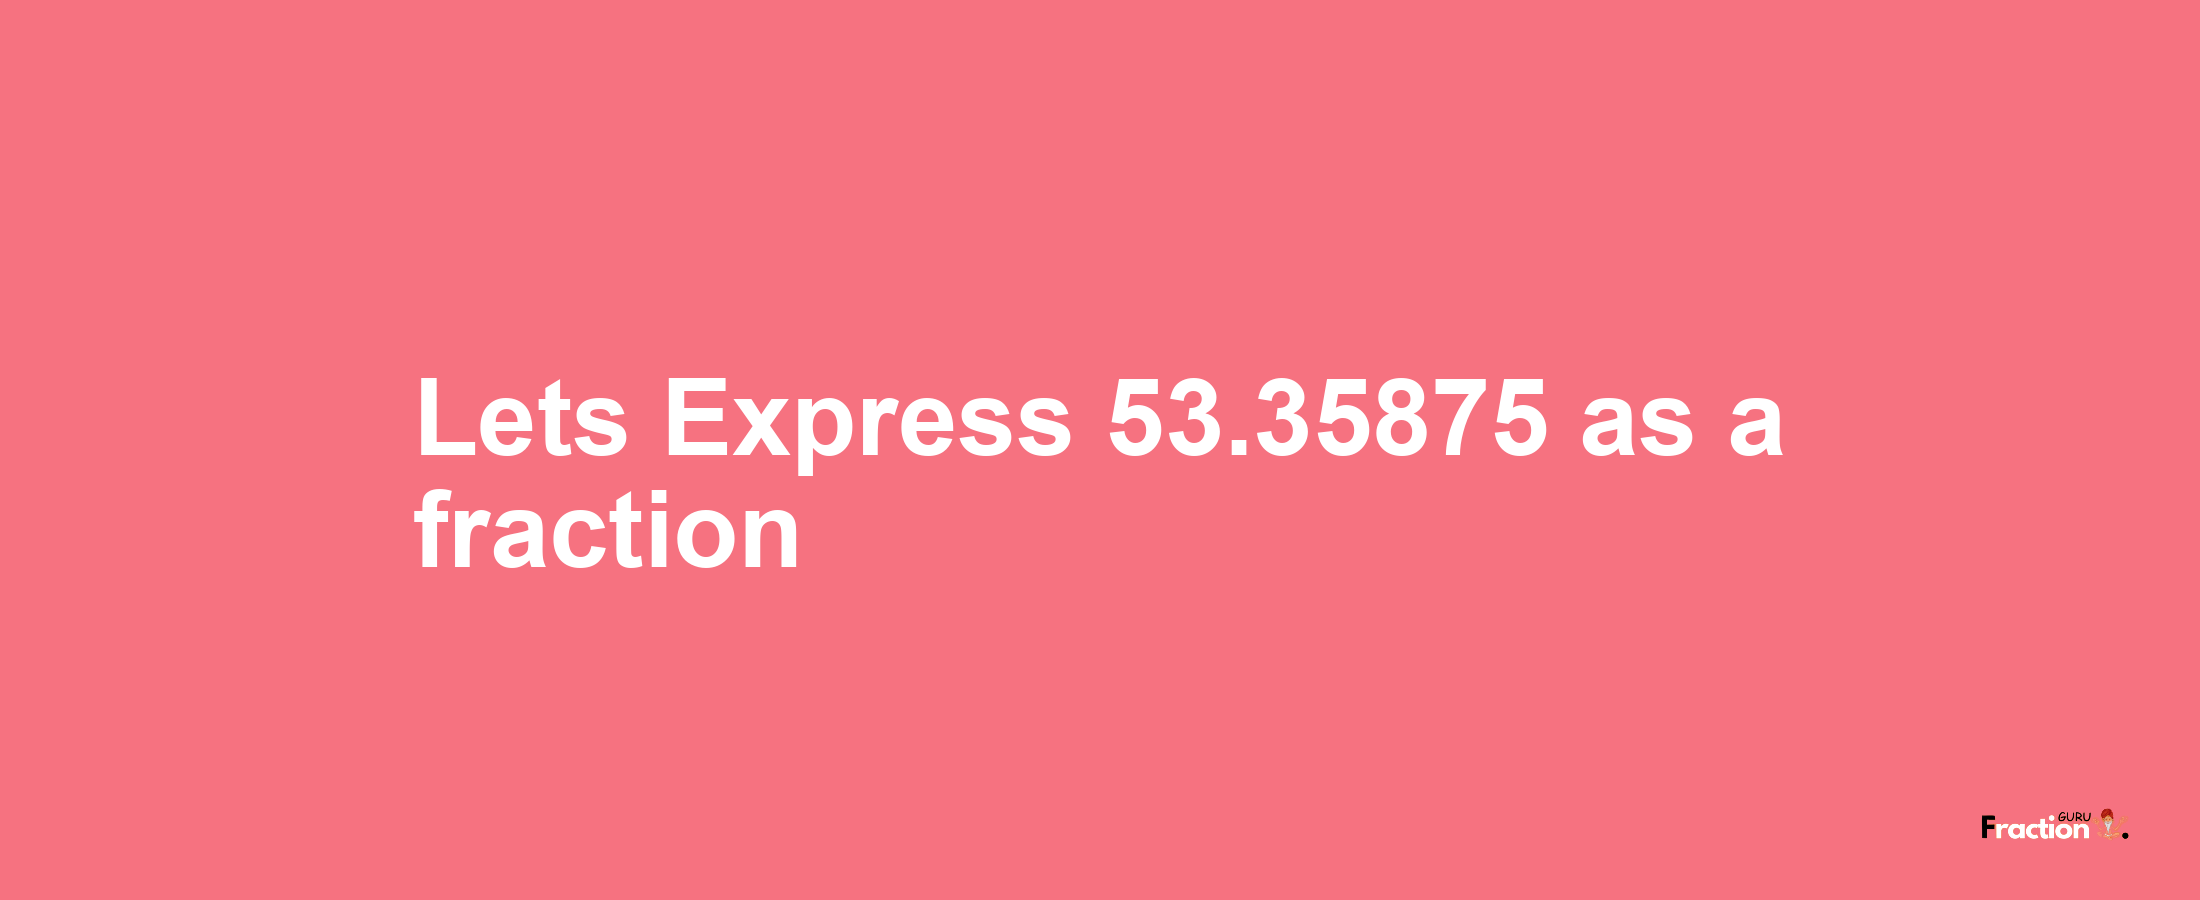 Lets Express 53.35875 as afraction